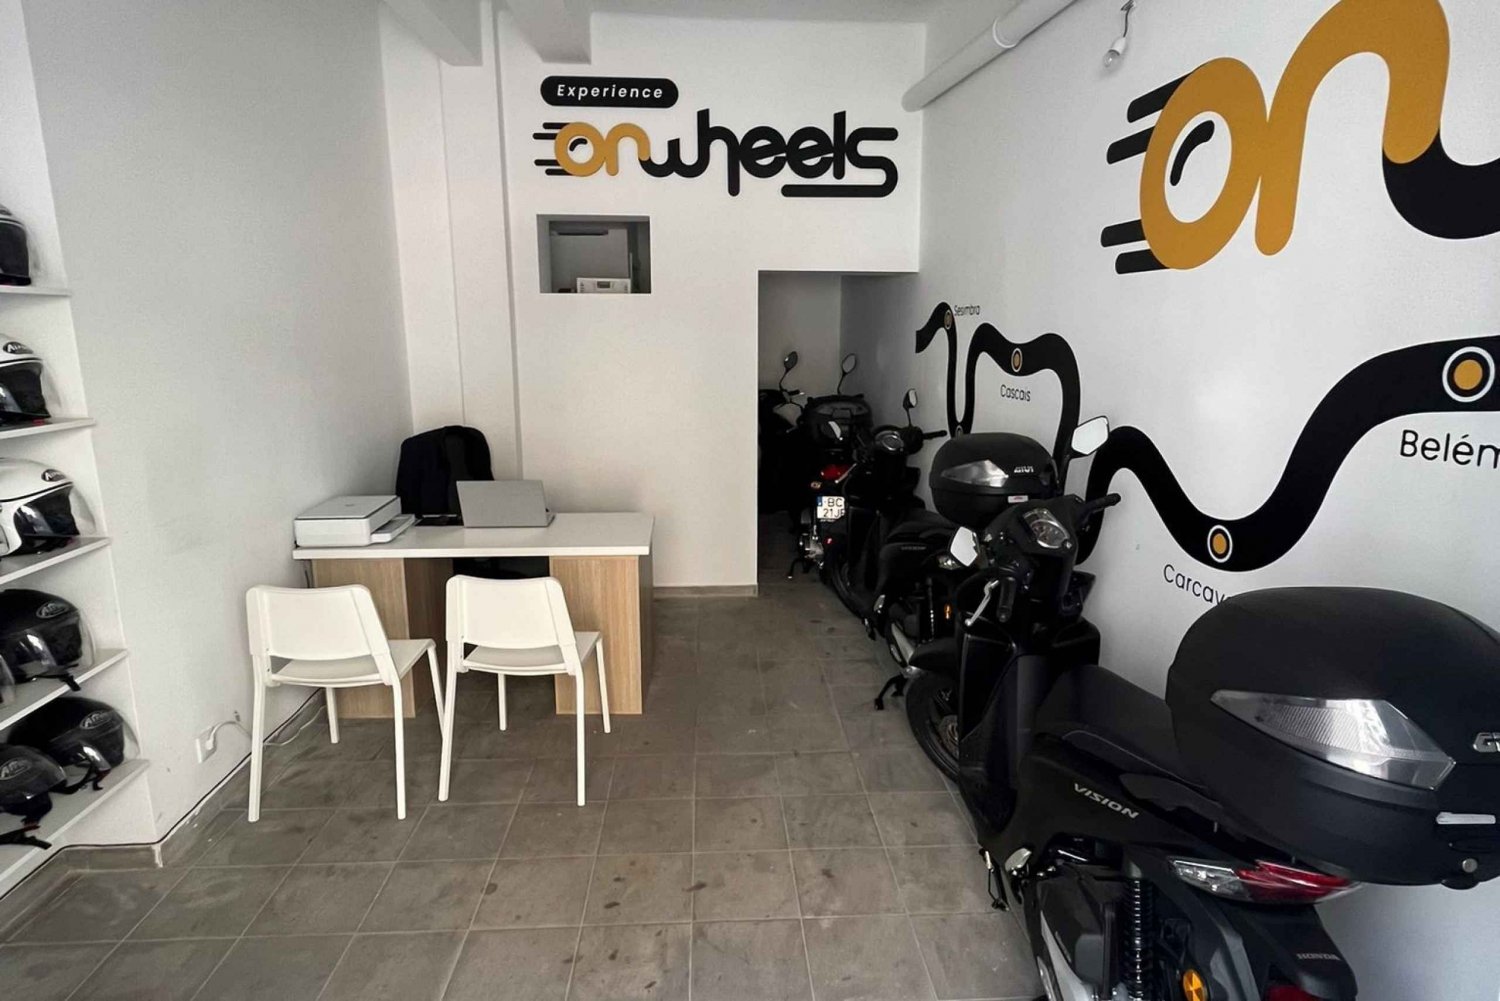 Scooter Rental Lisbon - Experience On Wheels